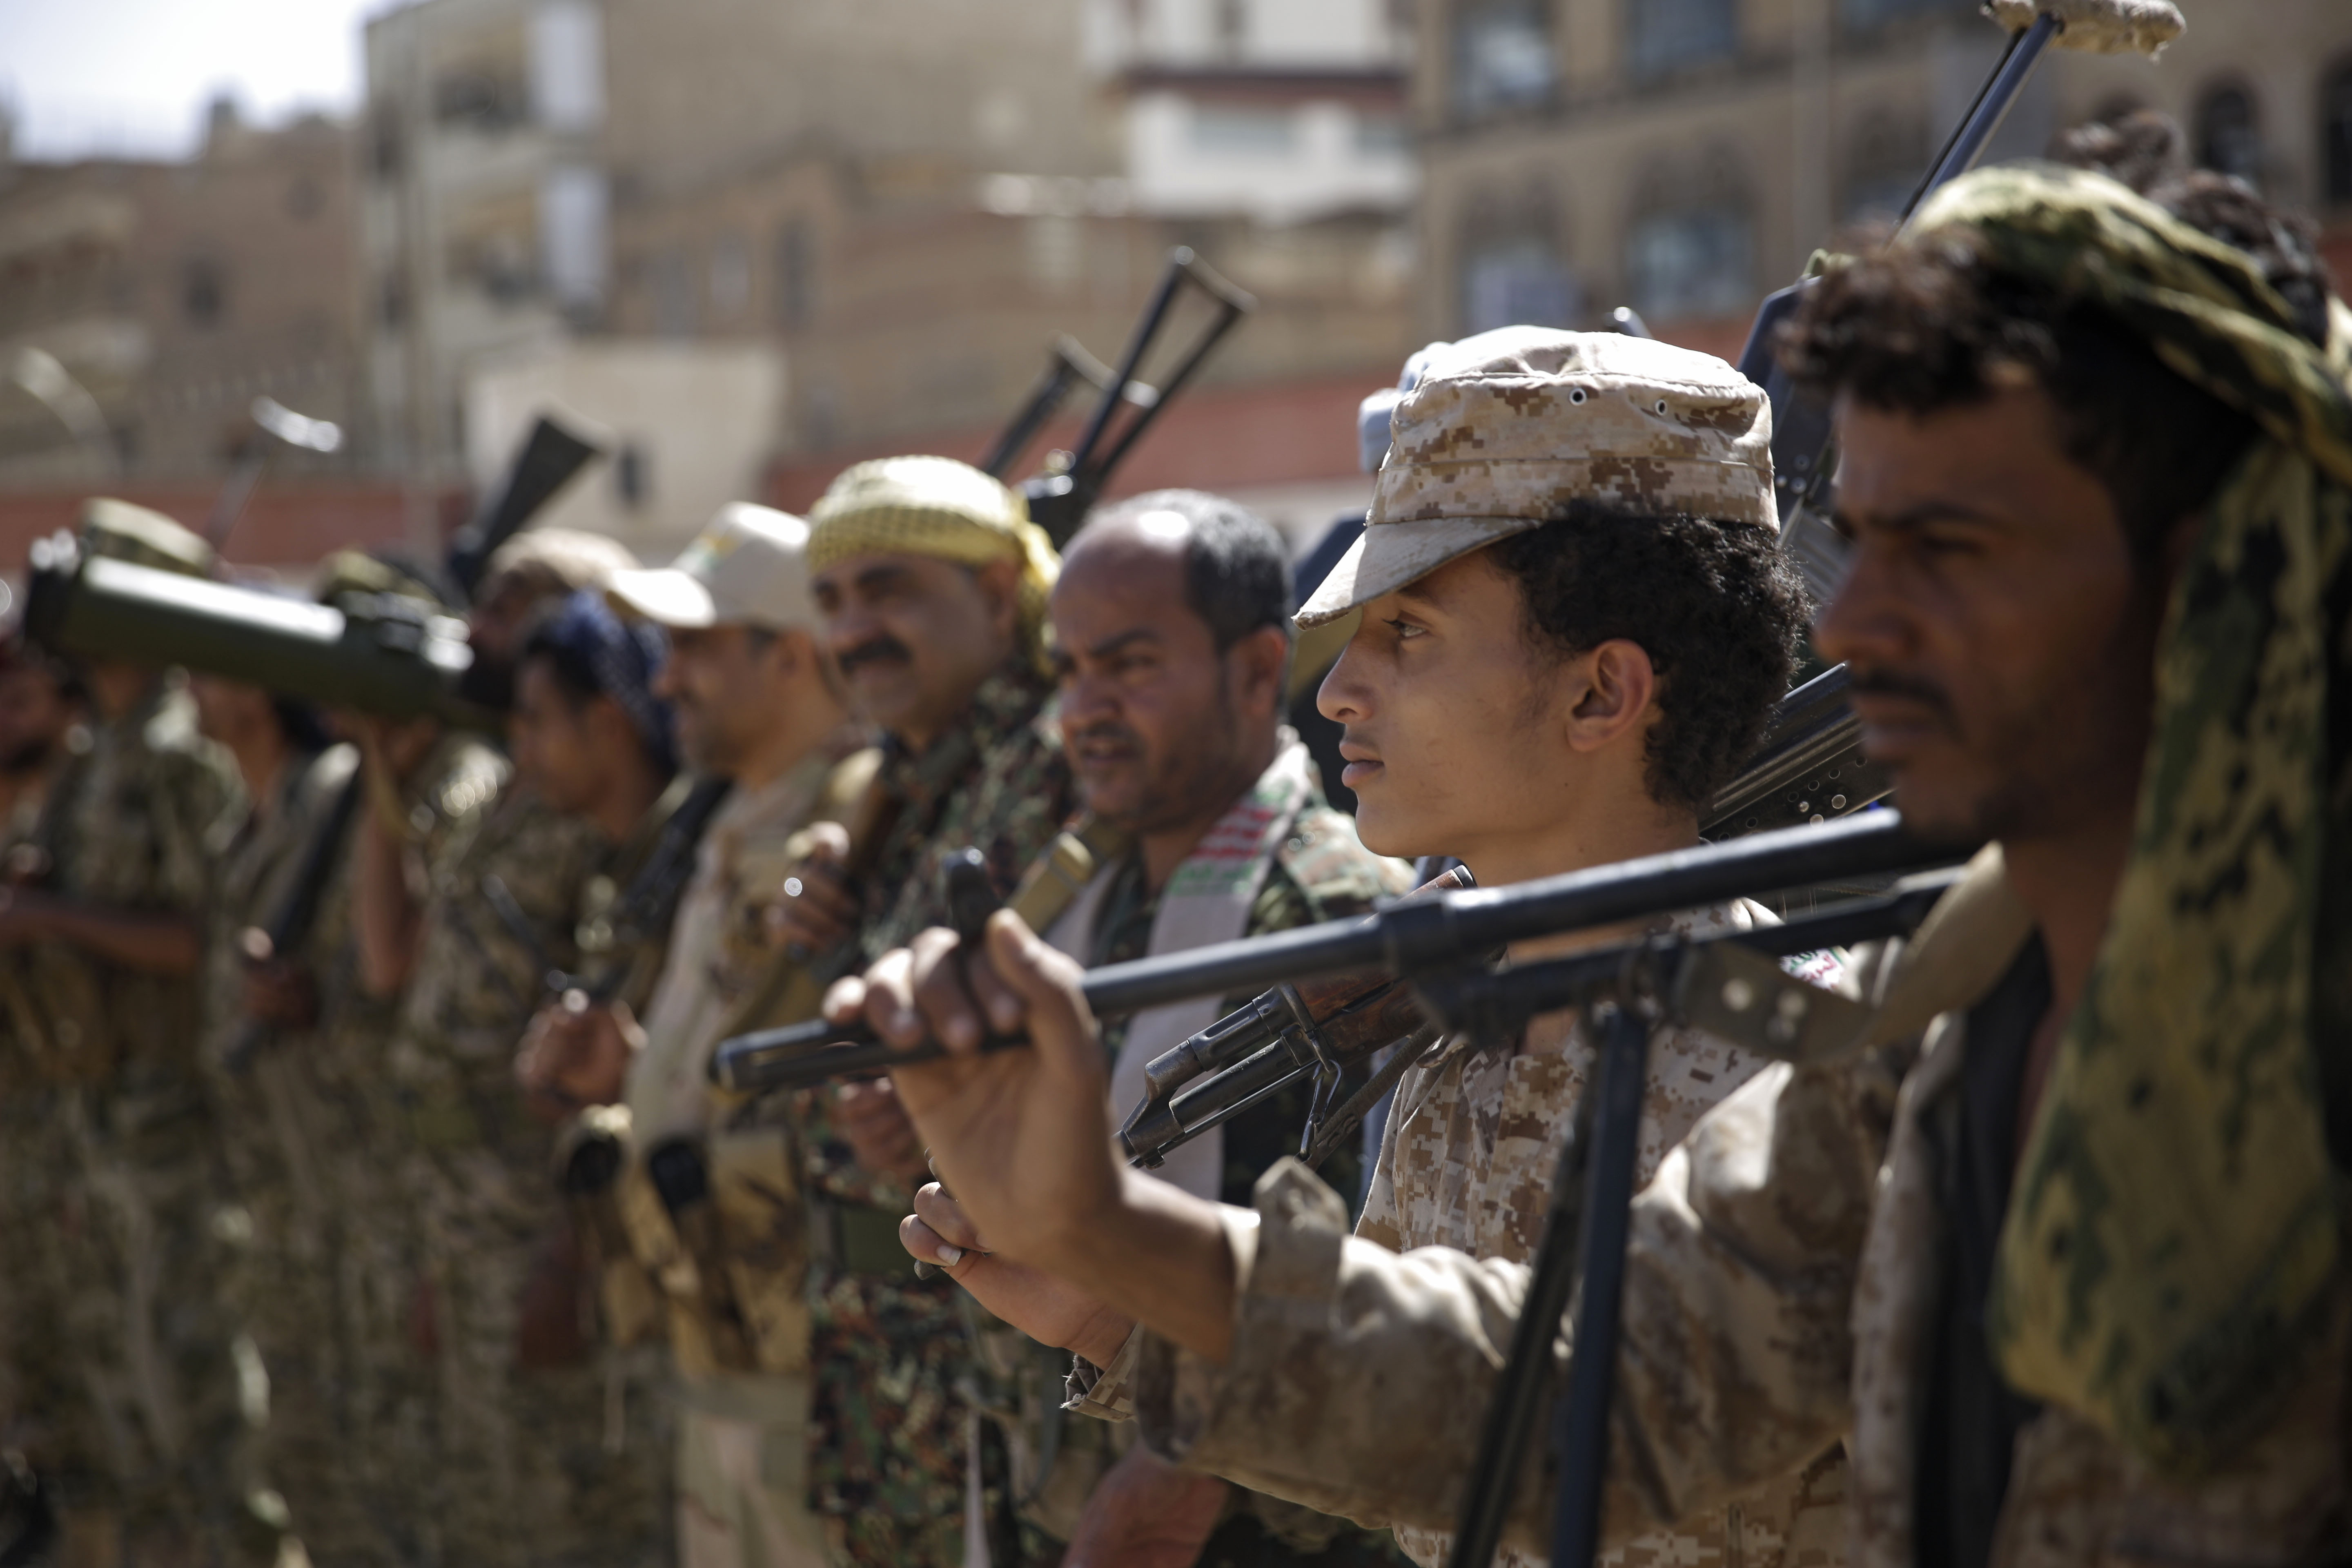 Houthi rebel fighters display their weapons during a gathering aimed at mobilizing more fighters for the Iranian-backed Houthi movement, in Sanaa, Yemen, Thursday, Feb. 20, 2020. The Houthi rebels control the capital, Sanaa, and much of the country’s north, where most of the population lives. They are at war with a U.S.-backed, Saudi-led coalition fighting on behalf of the internationally recognized government. (AP Photo/Hani Mohammed)